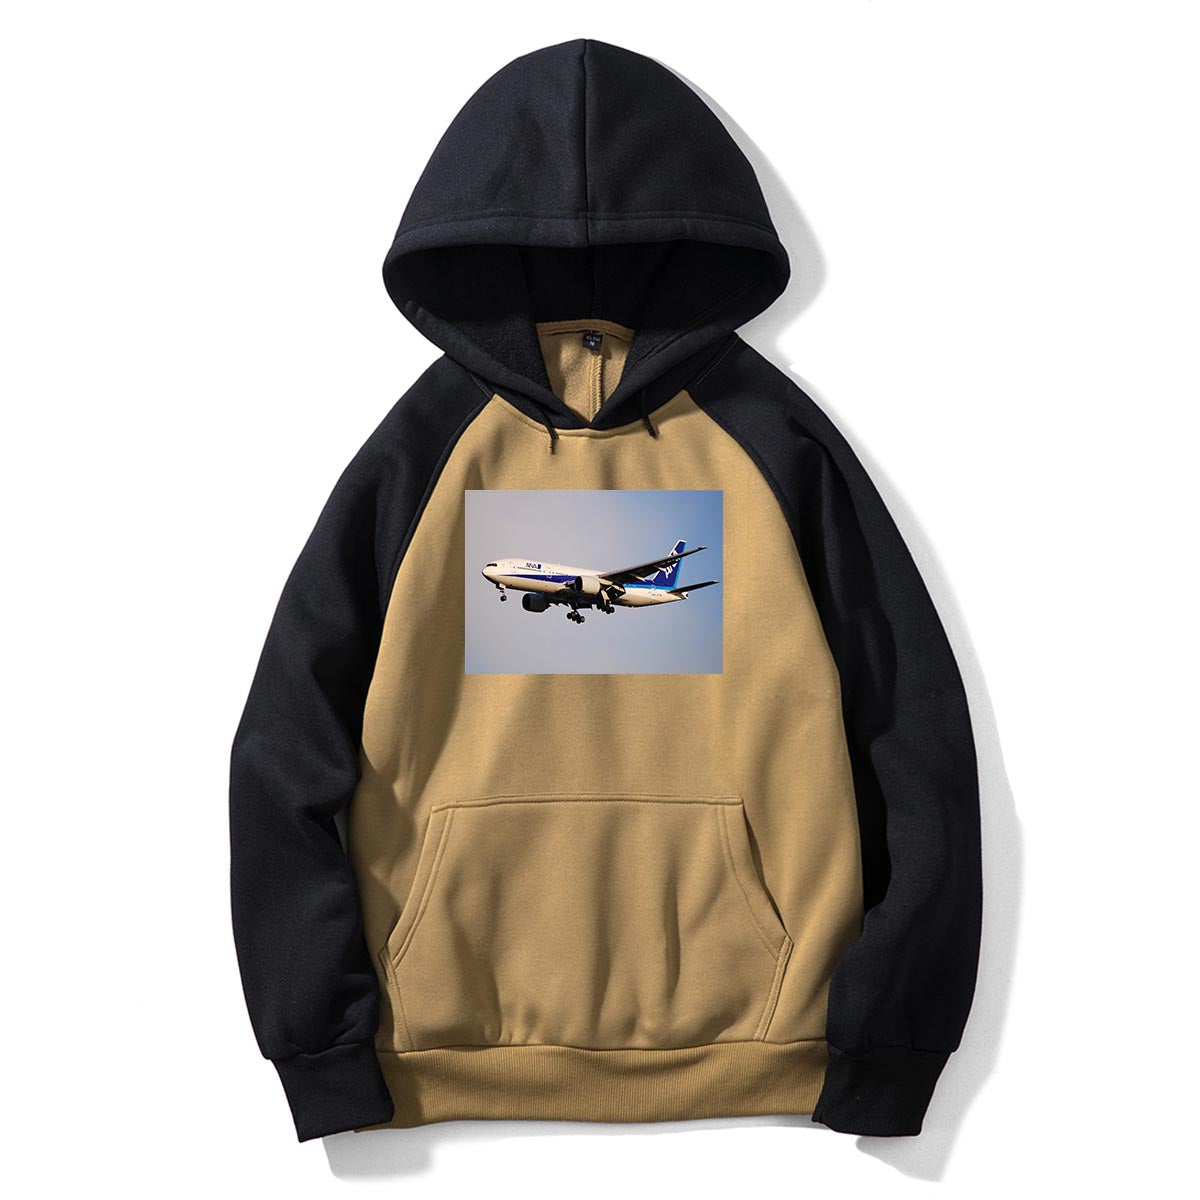 ANA's Boeing 777 Designed Colourful Hoodies